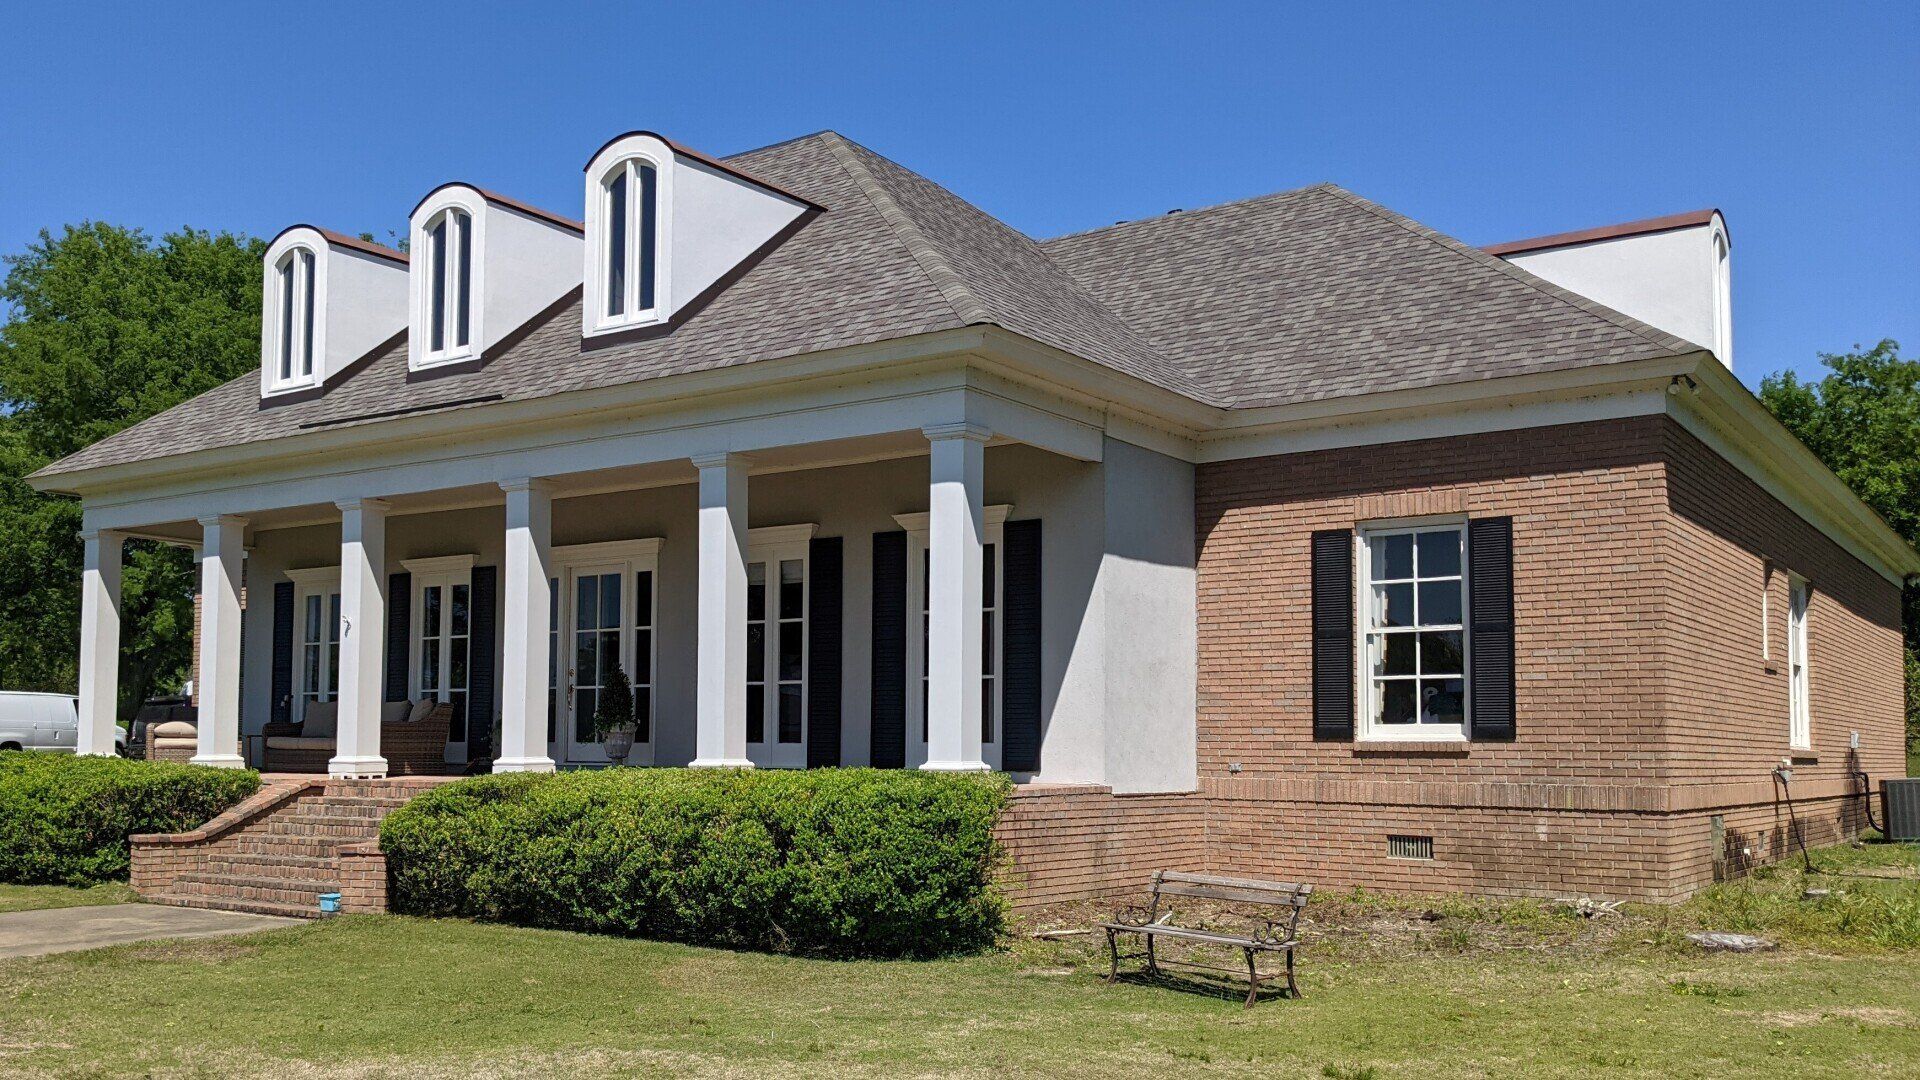 residential tinting in Montgomery AL - Before everything inside was protected with SPF Tint. UV-Sun Damage & Radiation was pouring inside the home's windows. 4/19/2021.